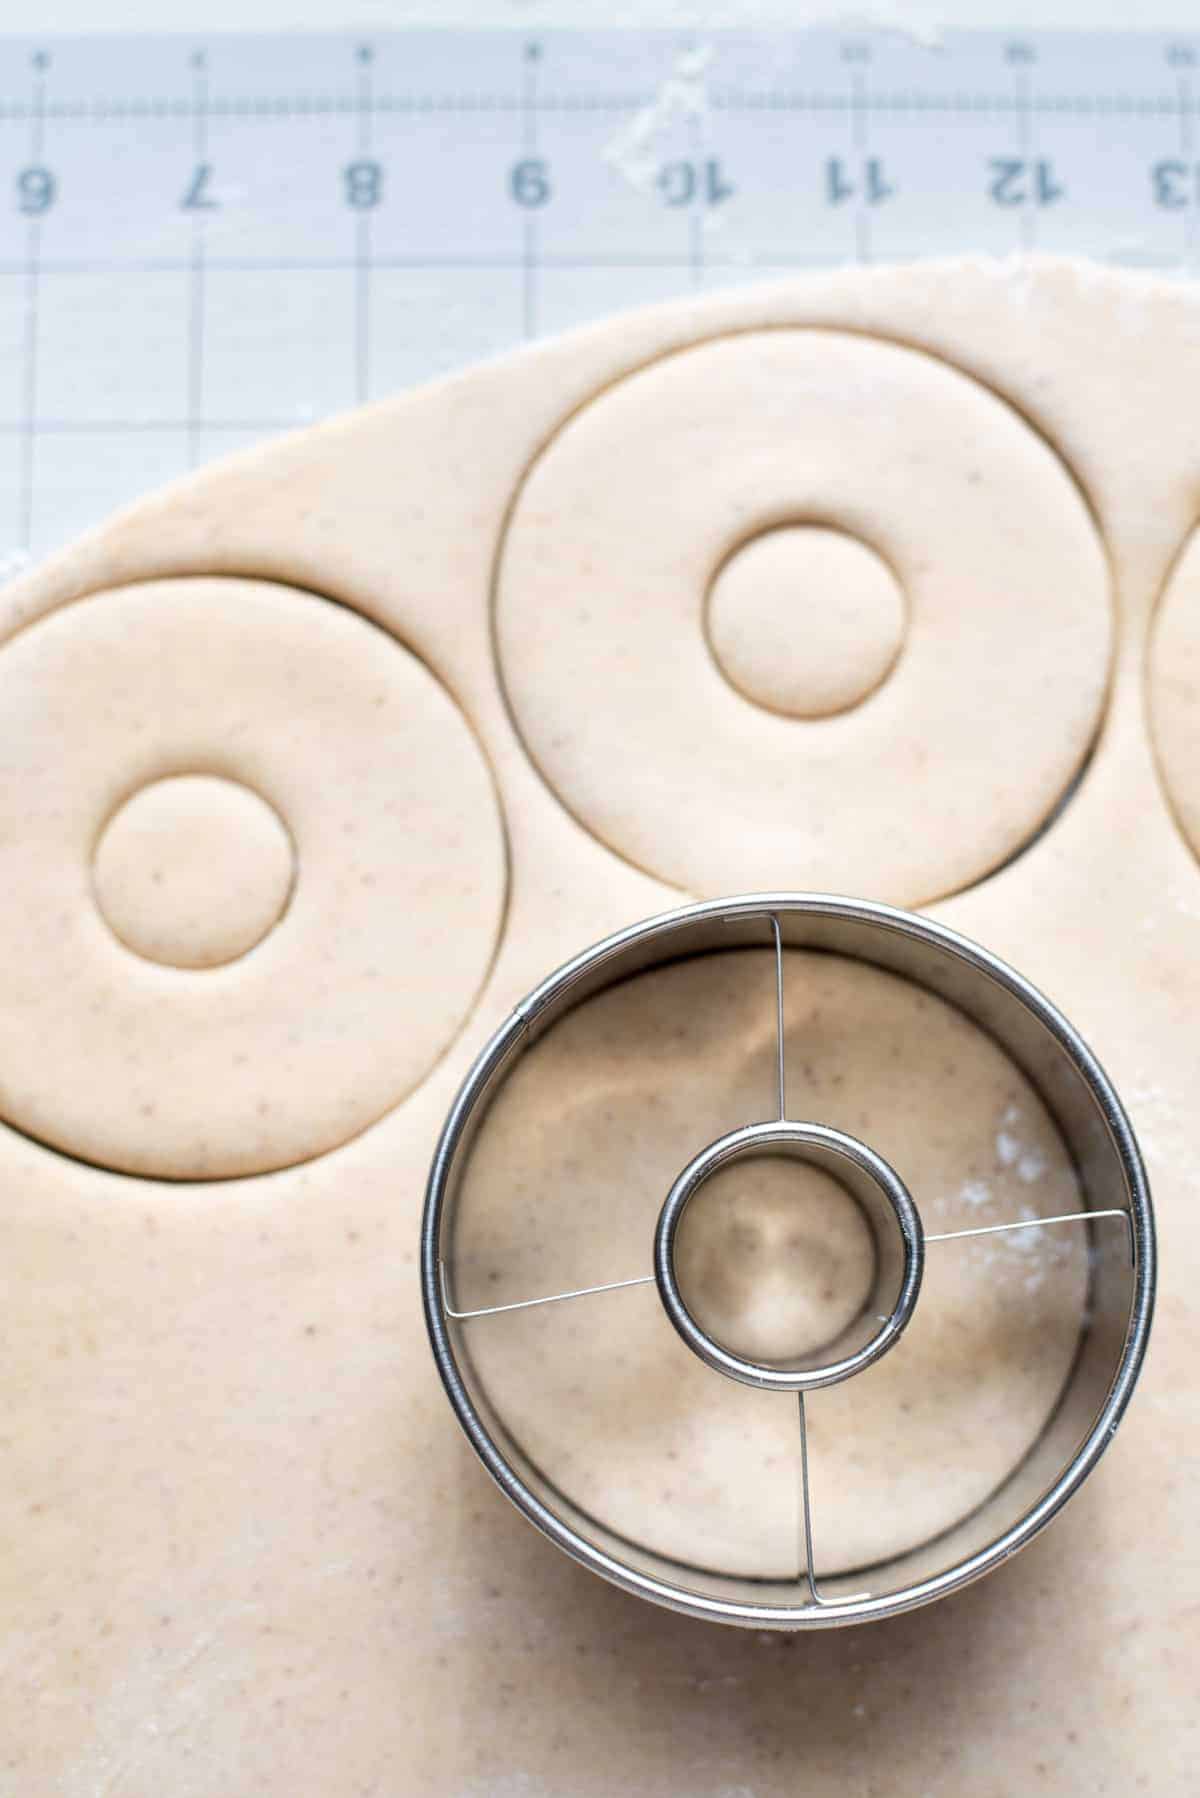 The gingerbread doughnut dough is sitting on top of graph paper and a cutter is being used to cut the doughnut shapes out. You can see 2 of the doughnuts cut from the dough already and another is being cut with the cutter here.